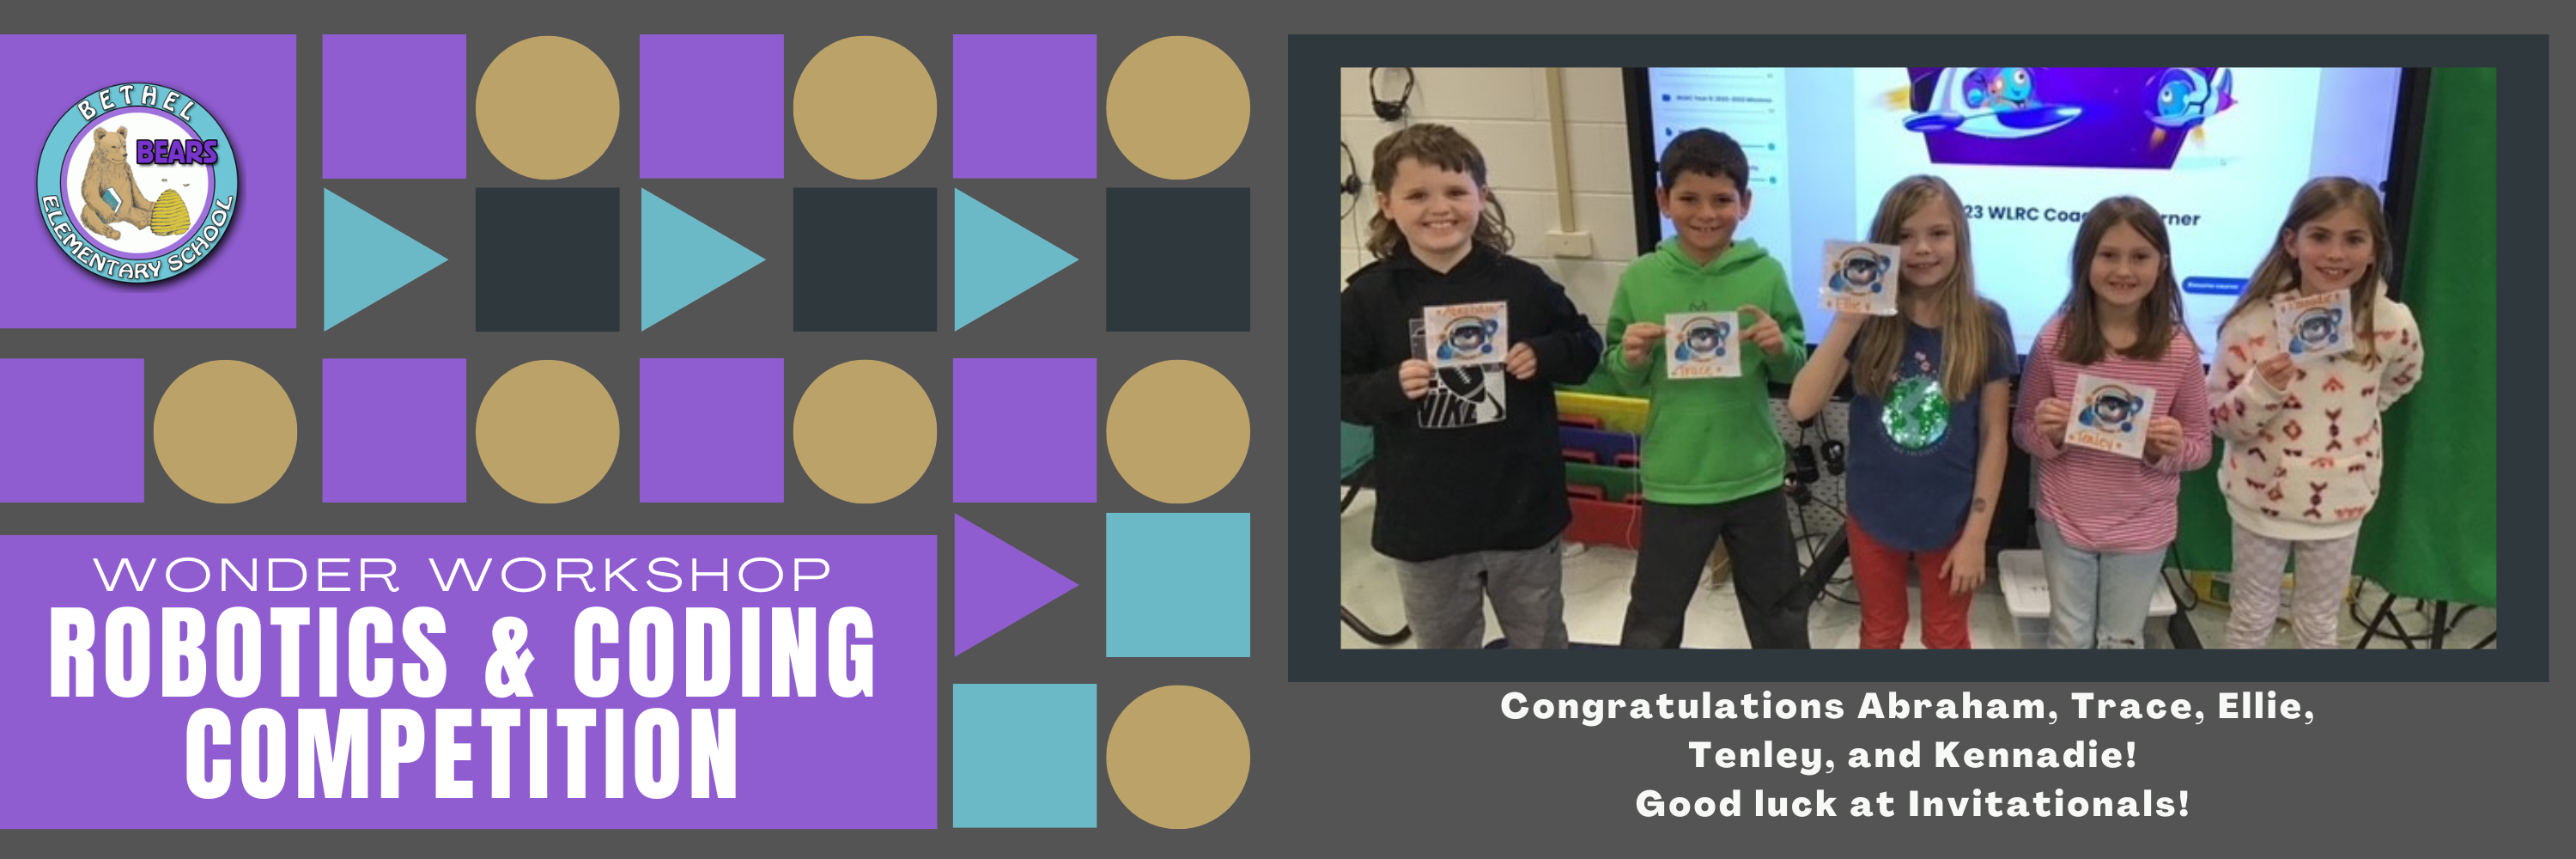 Congratulations to Bethel Bears Abraham, Trace, Ellie, Tenley, and Kennadie who competed in the Wonder Workshop's robotics and coding competition. They will head to the invitational round next. 